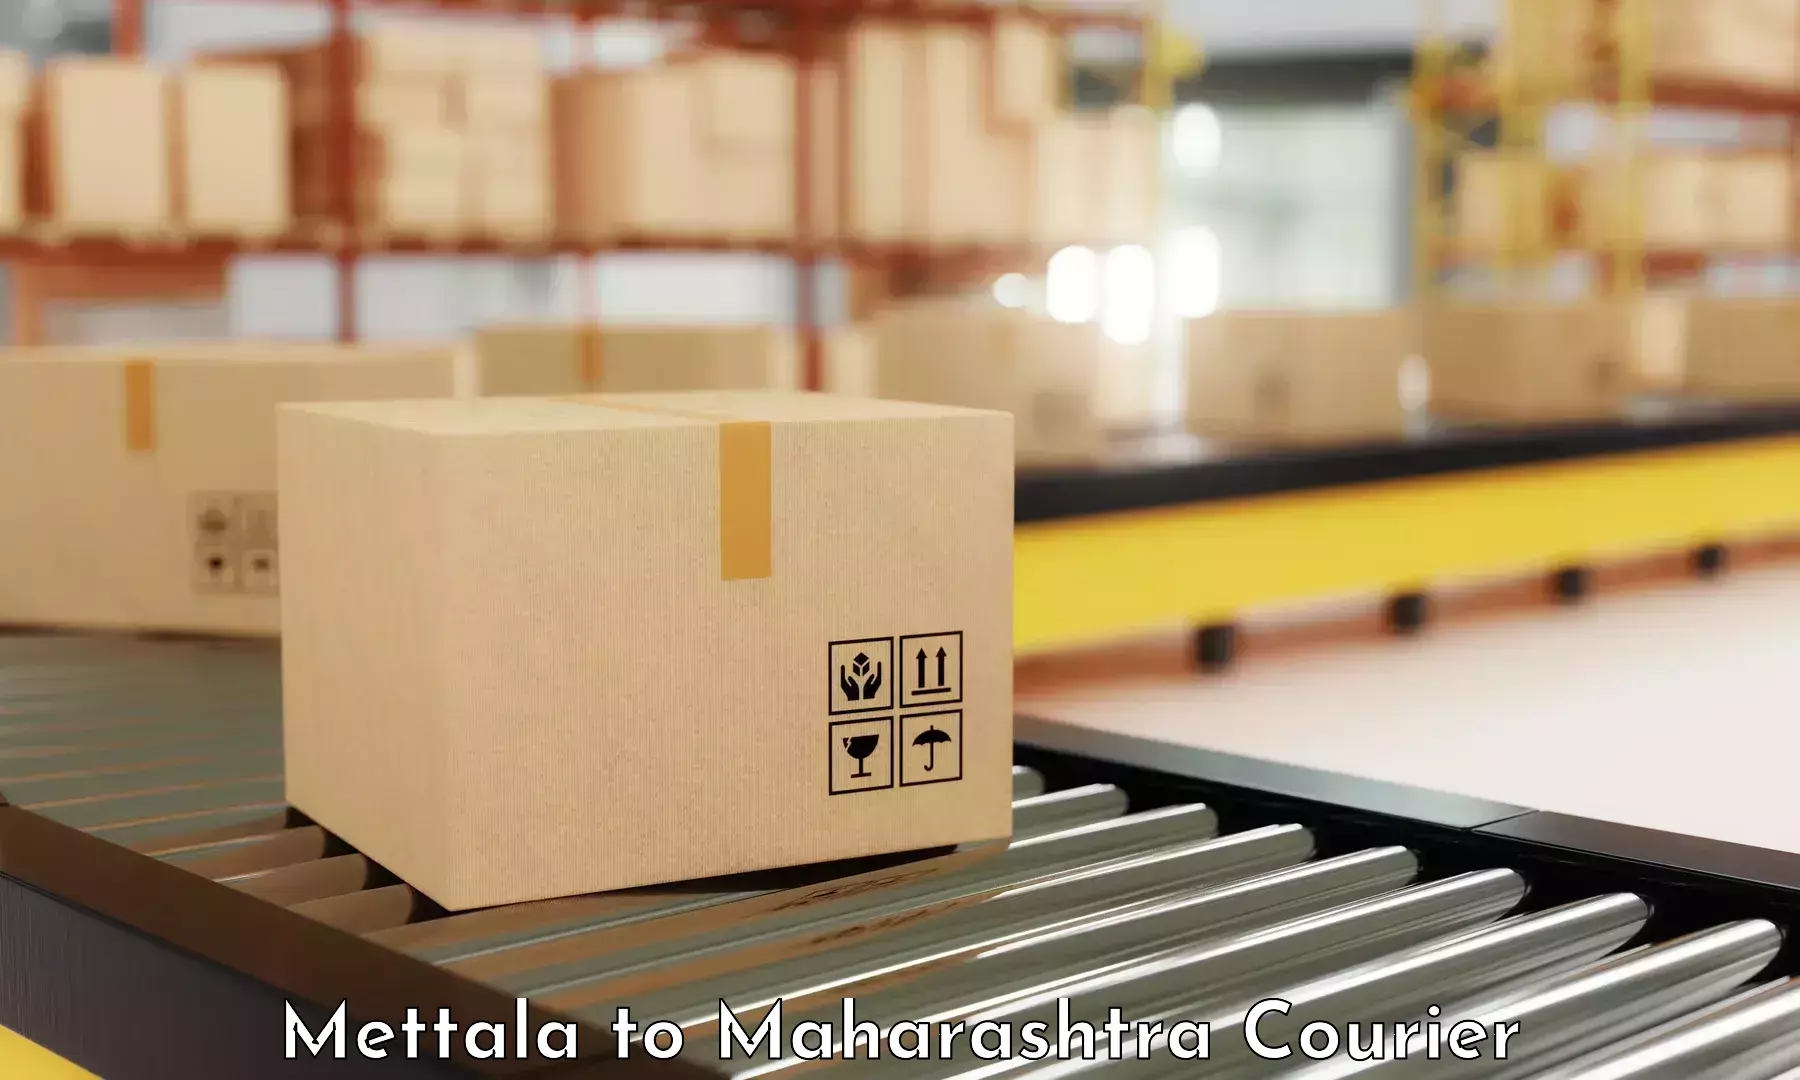 Holiday shipping services Mettala to Mul